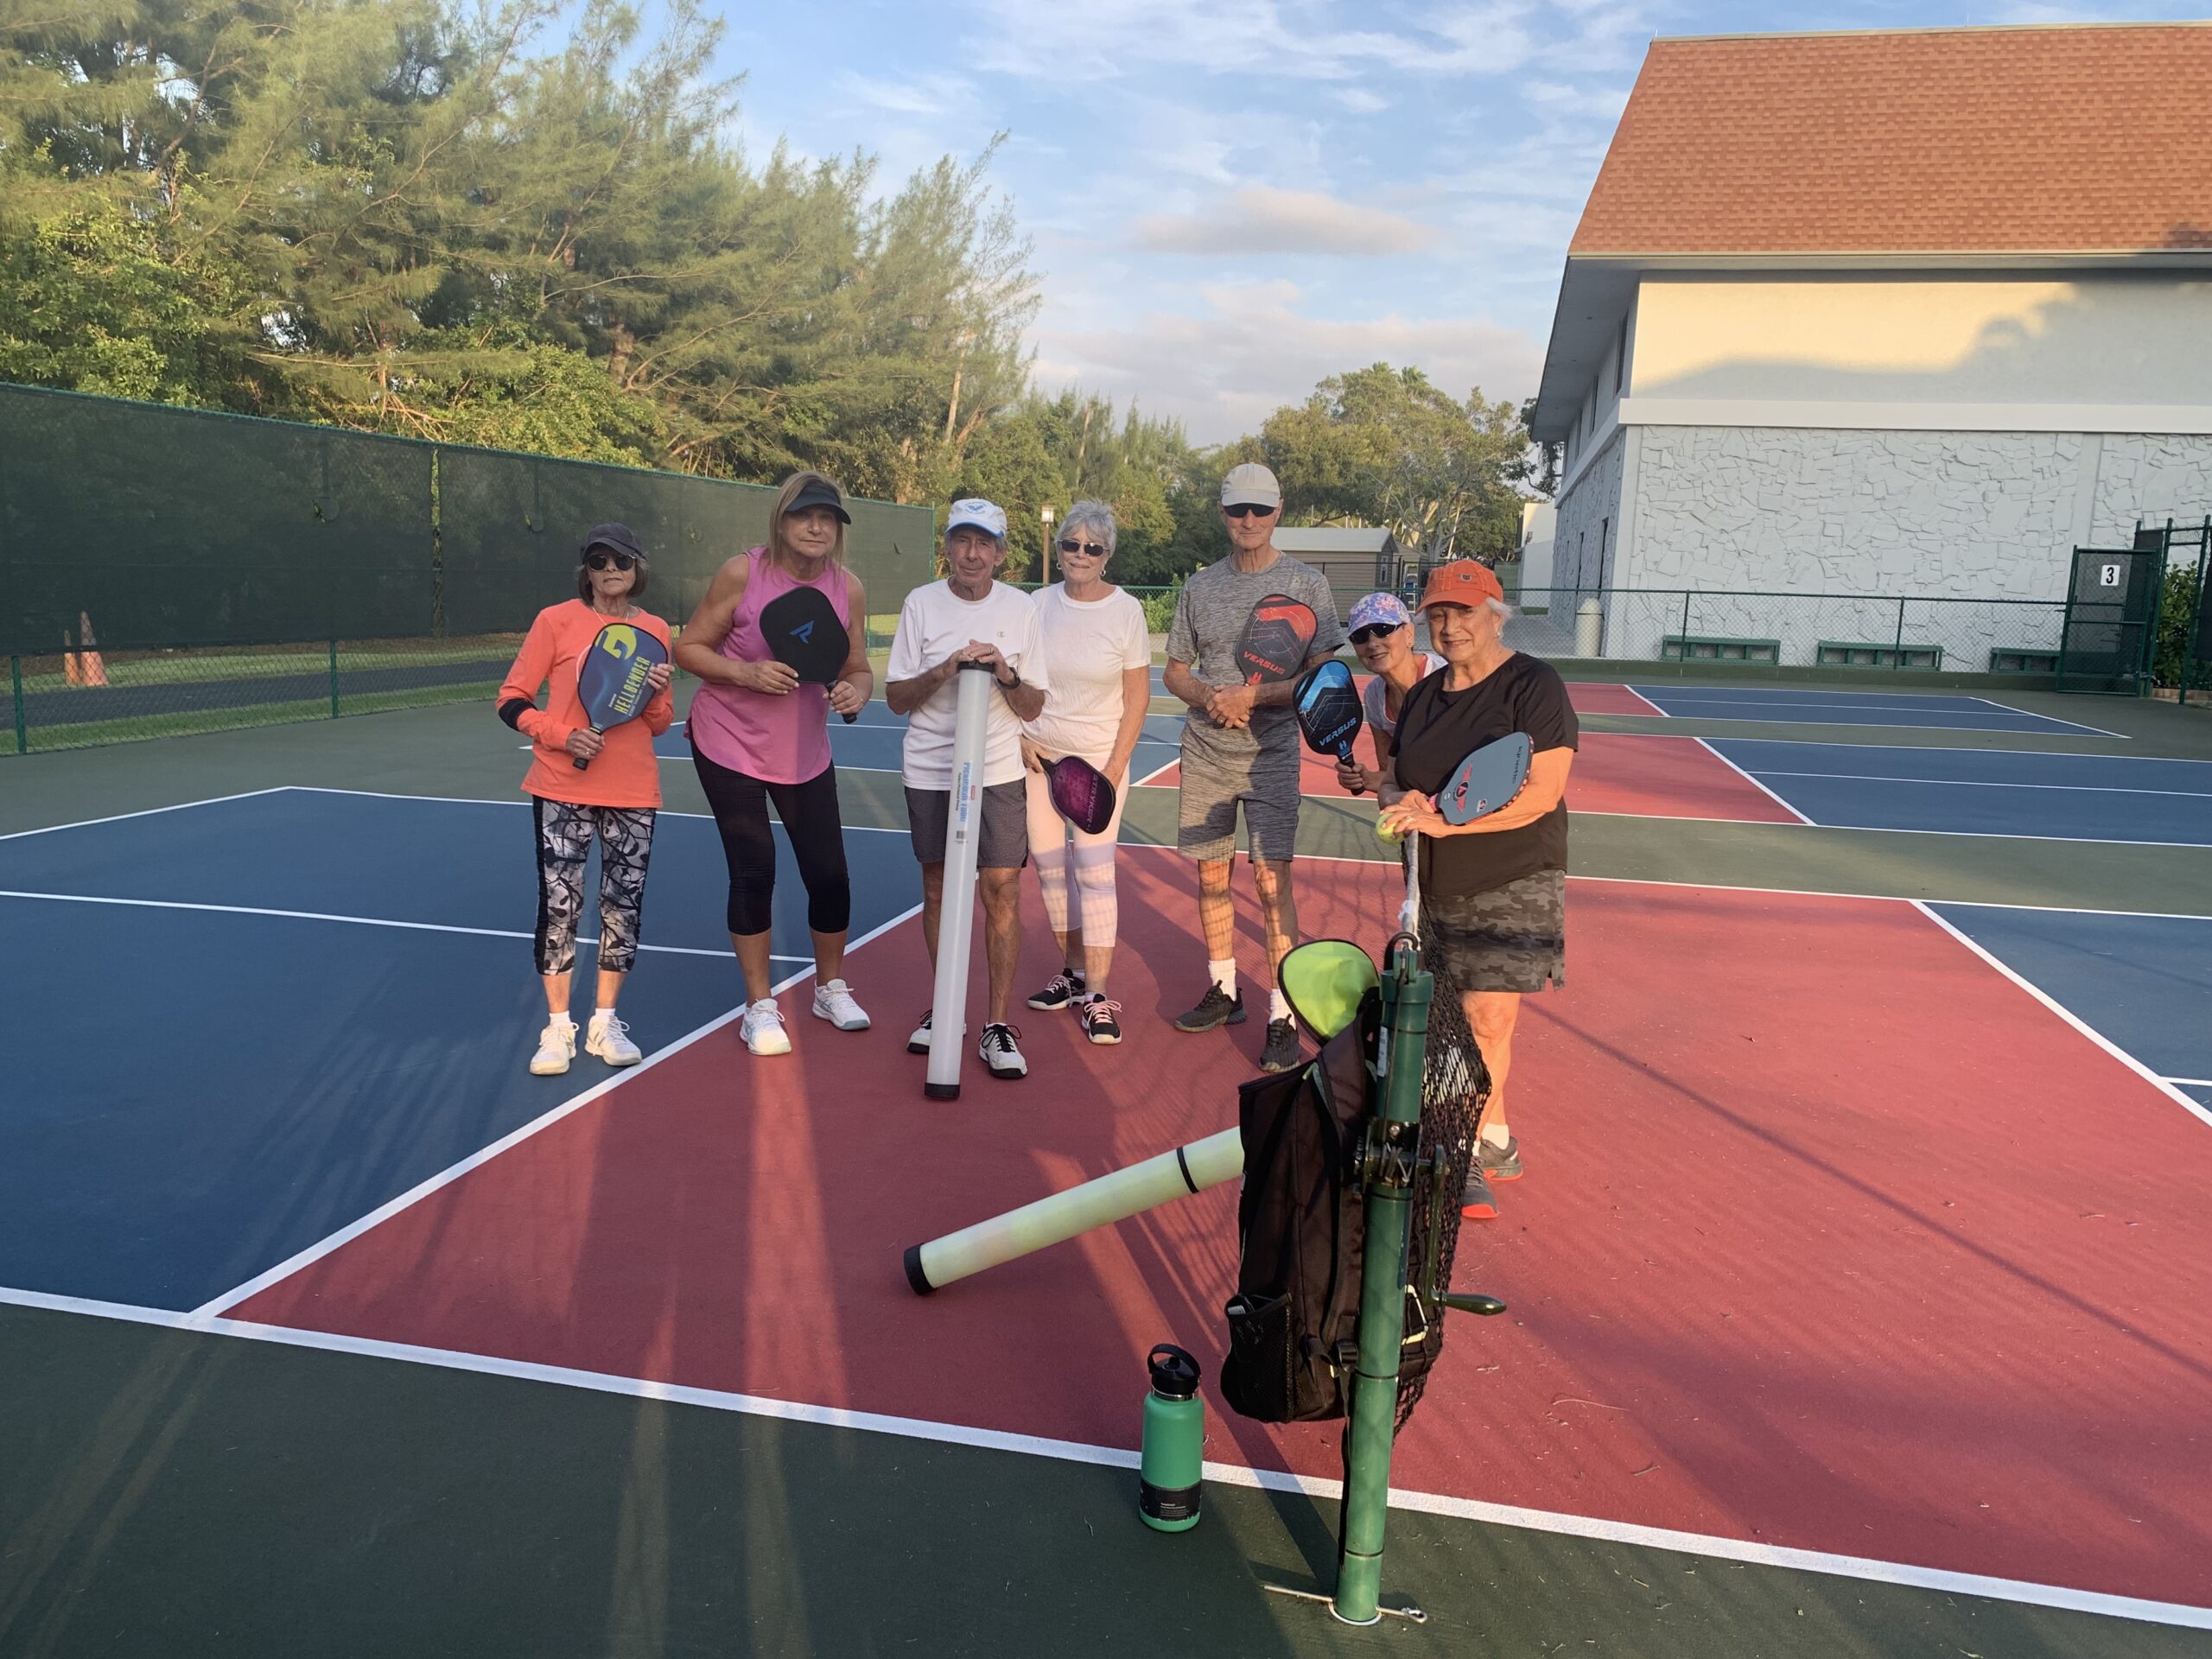 Bob-Savar-PPR-Certified-Pickleball-Instructor-teaching-an-Advanced-Pickleball-Clinic-on-doubles-strategy-at-Huntington-Lakes-in-Delray-Beach-Florida